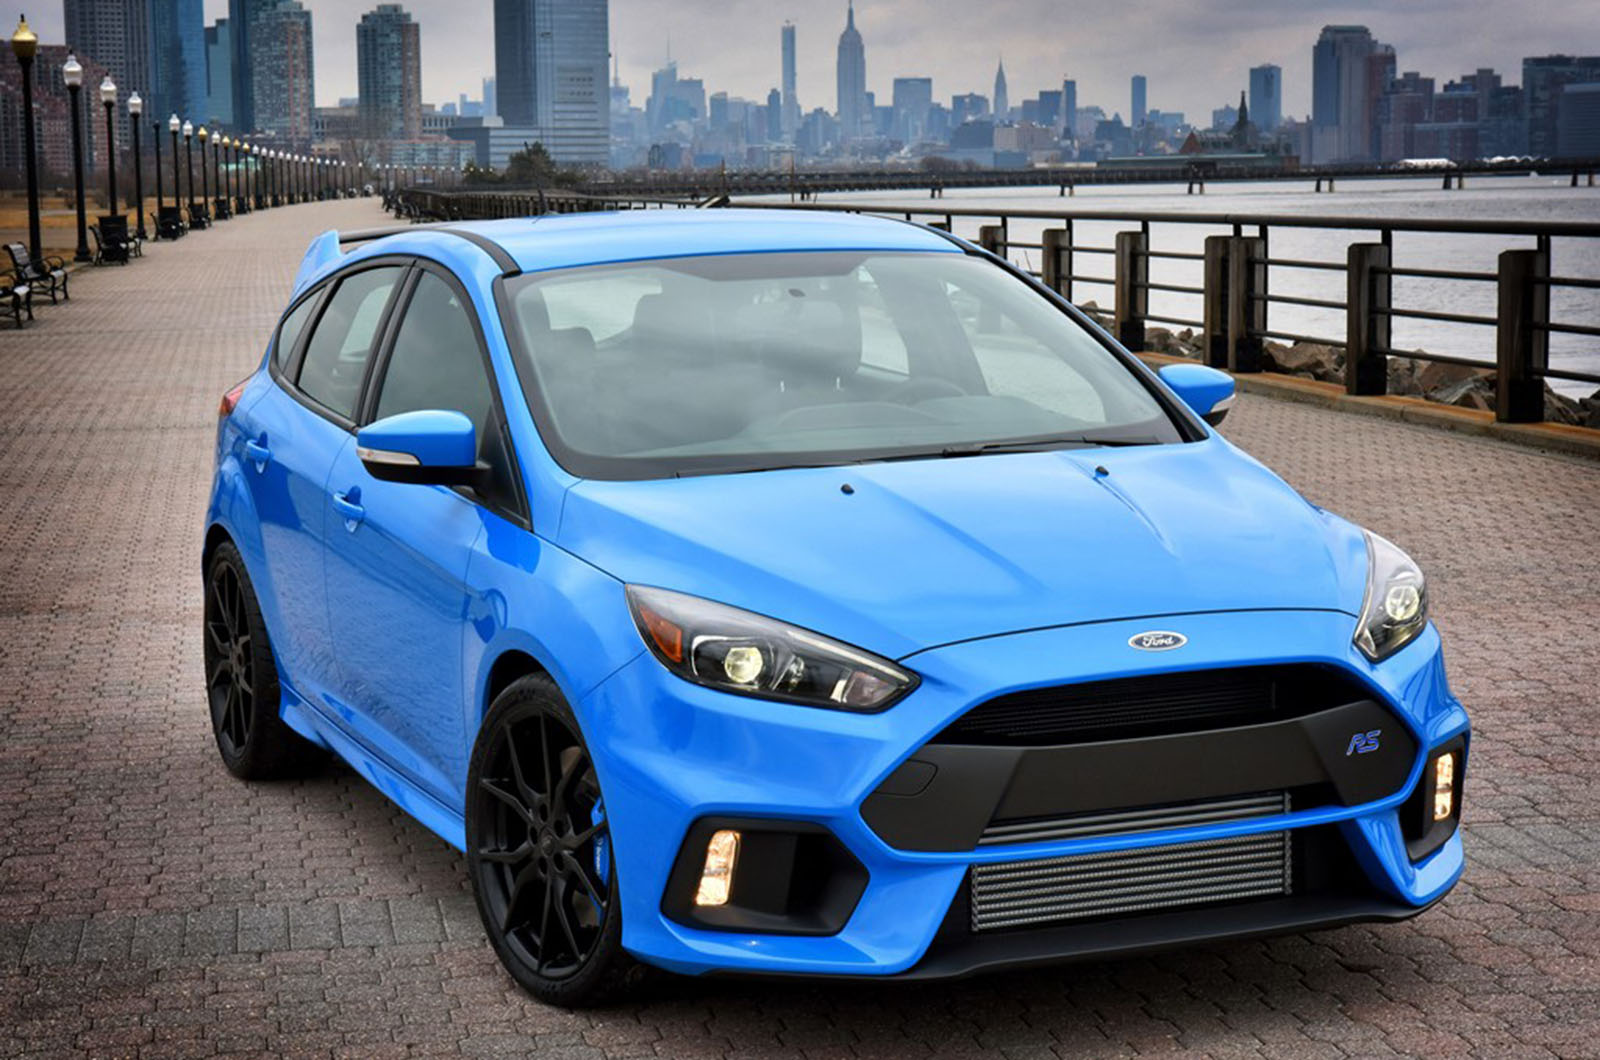 2016 Ford Focus Model Options and Prices